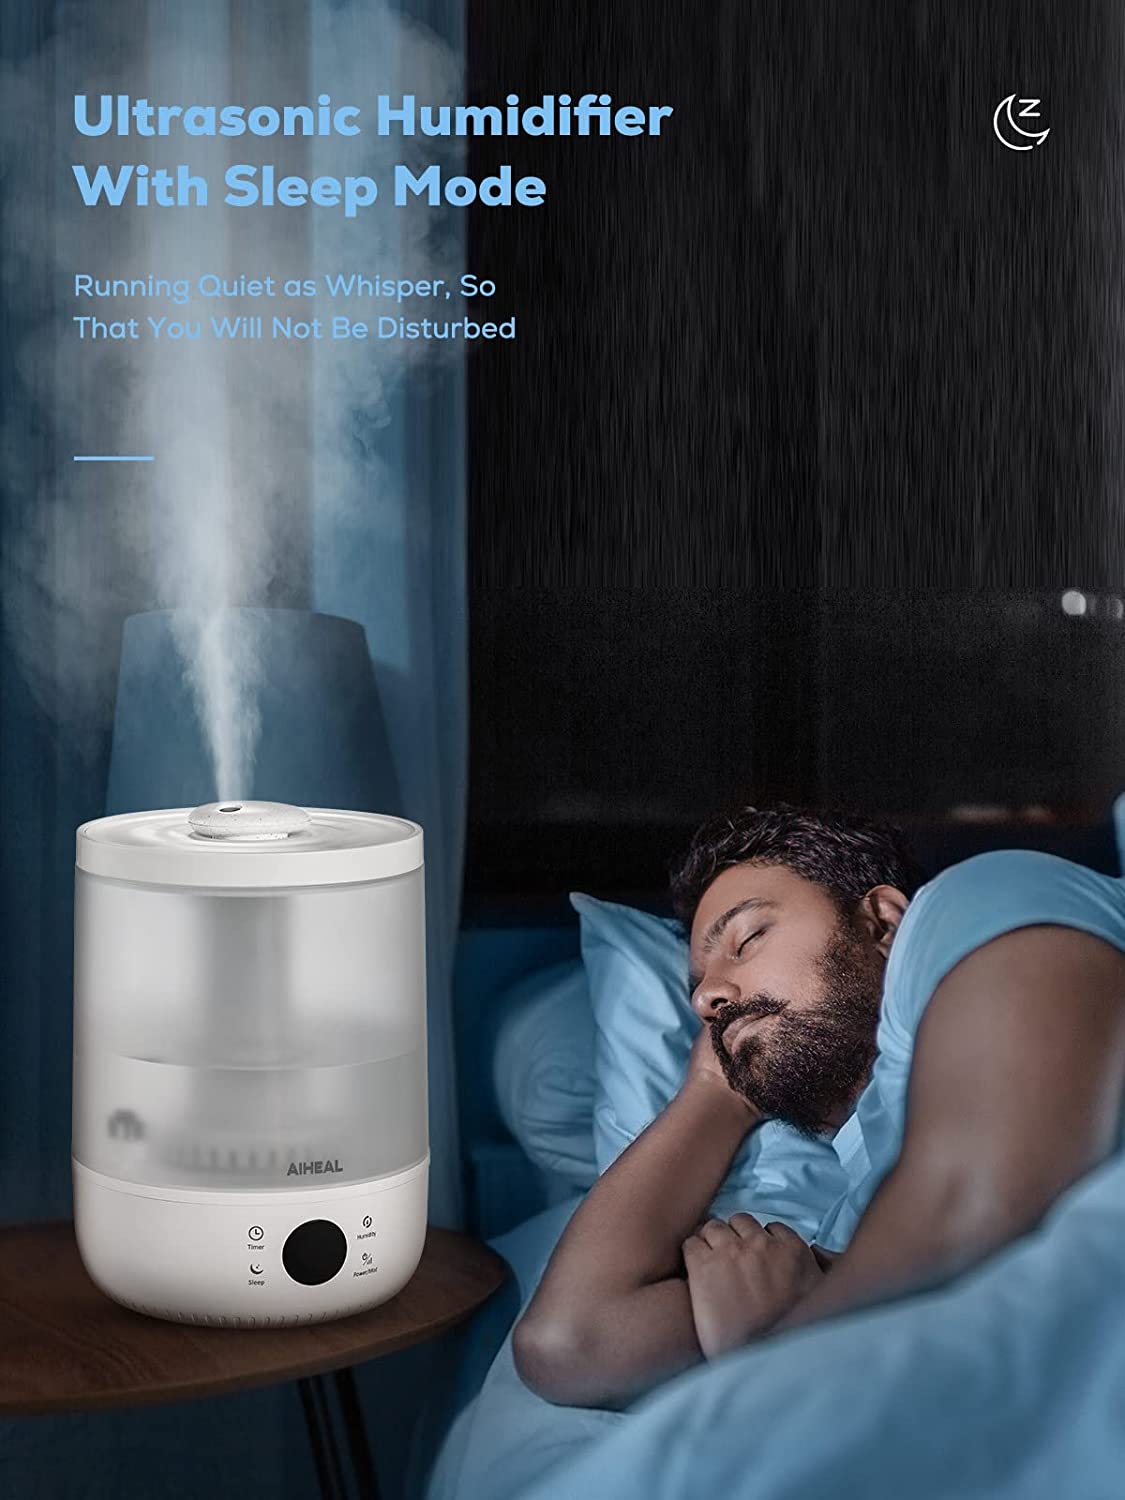 Aiheal Humidifiers for Bedroom Large Room Home, 4.5L Top Fill Cool Mist Ultrasonic Humidifier for Plants and Baby, Lasts 37 Hours, Humidity Setting, Timer, Auto Shut Off, Quiet Sleep Mode, Easy to Clean, White